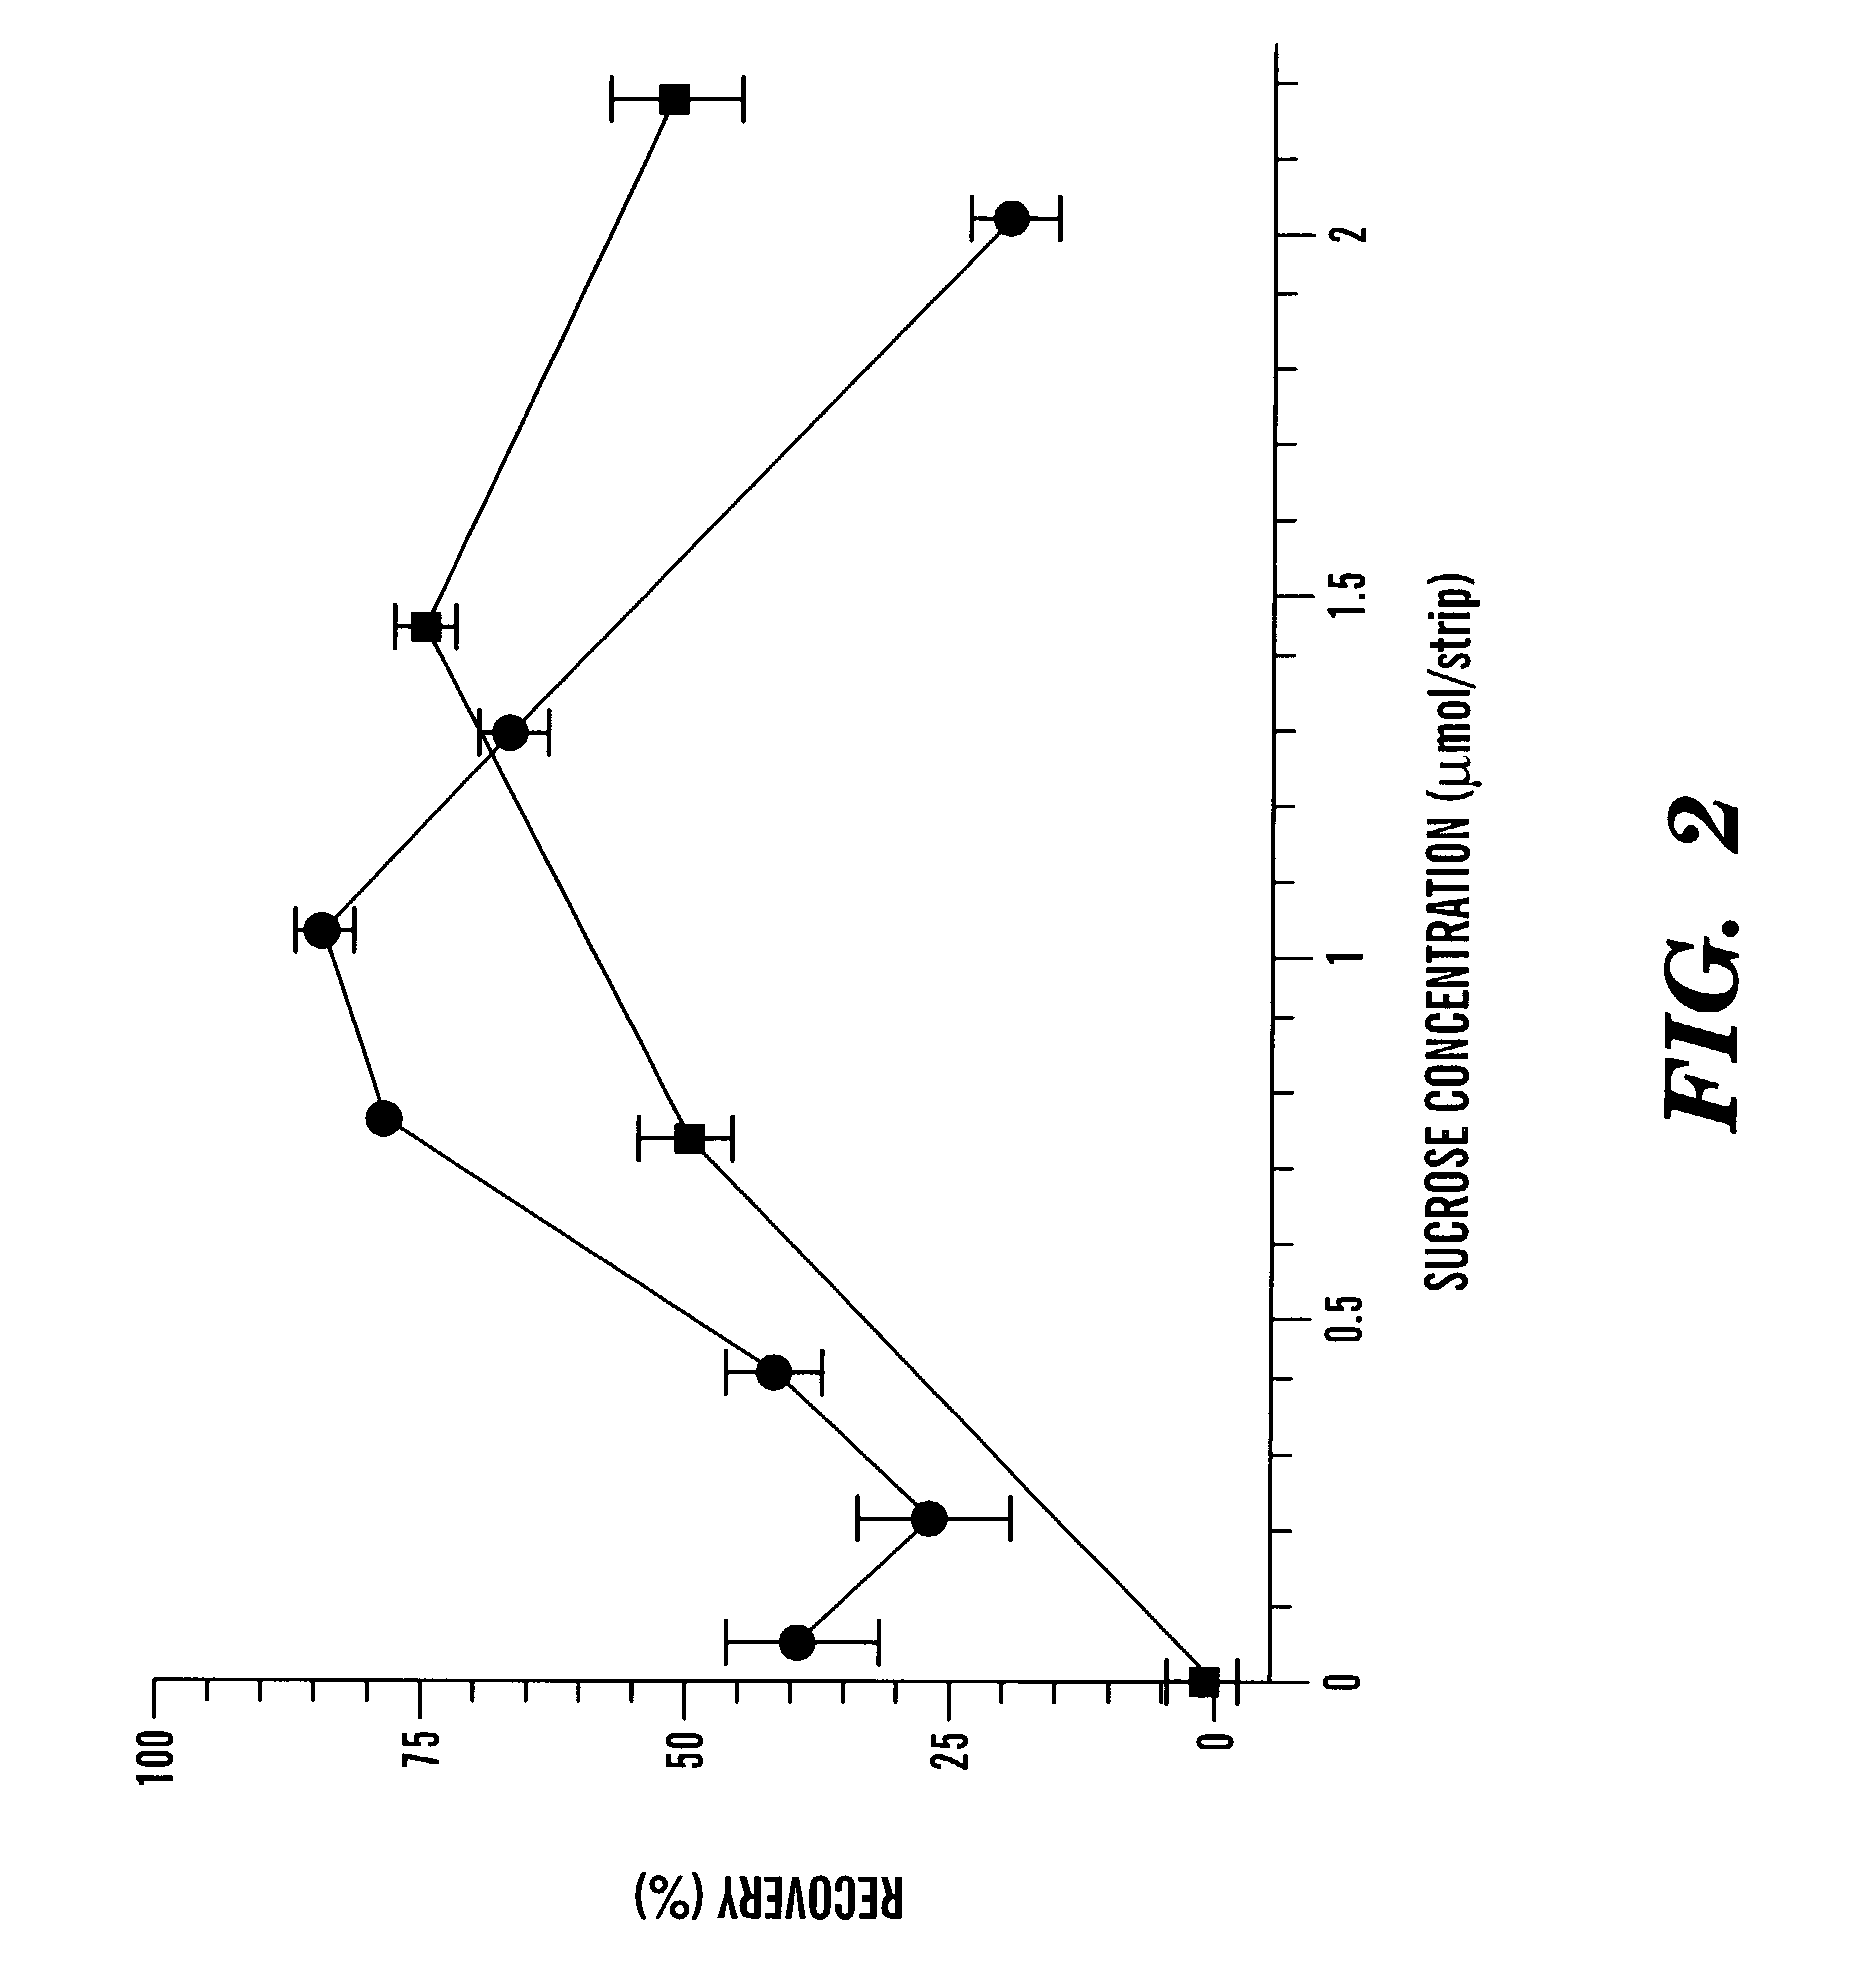 Method of making a test device